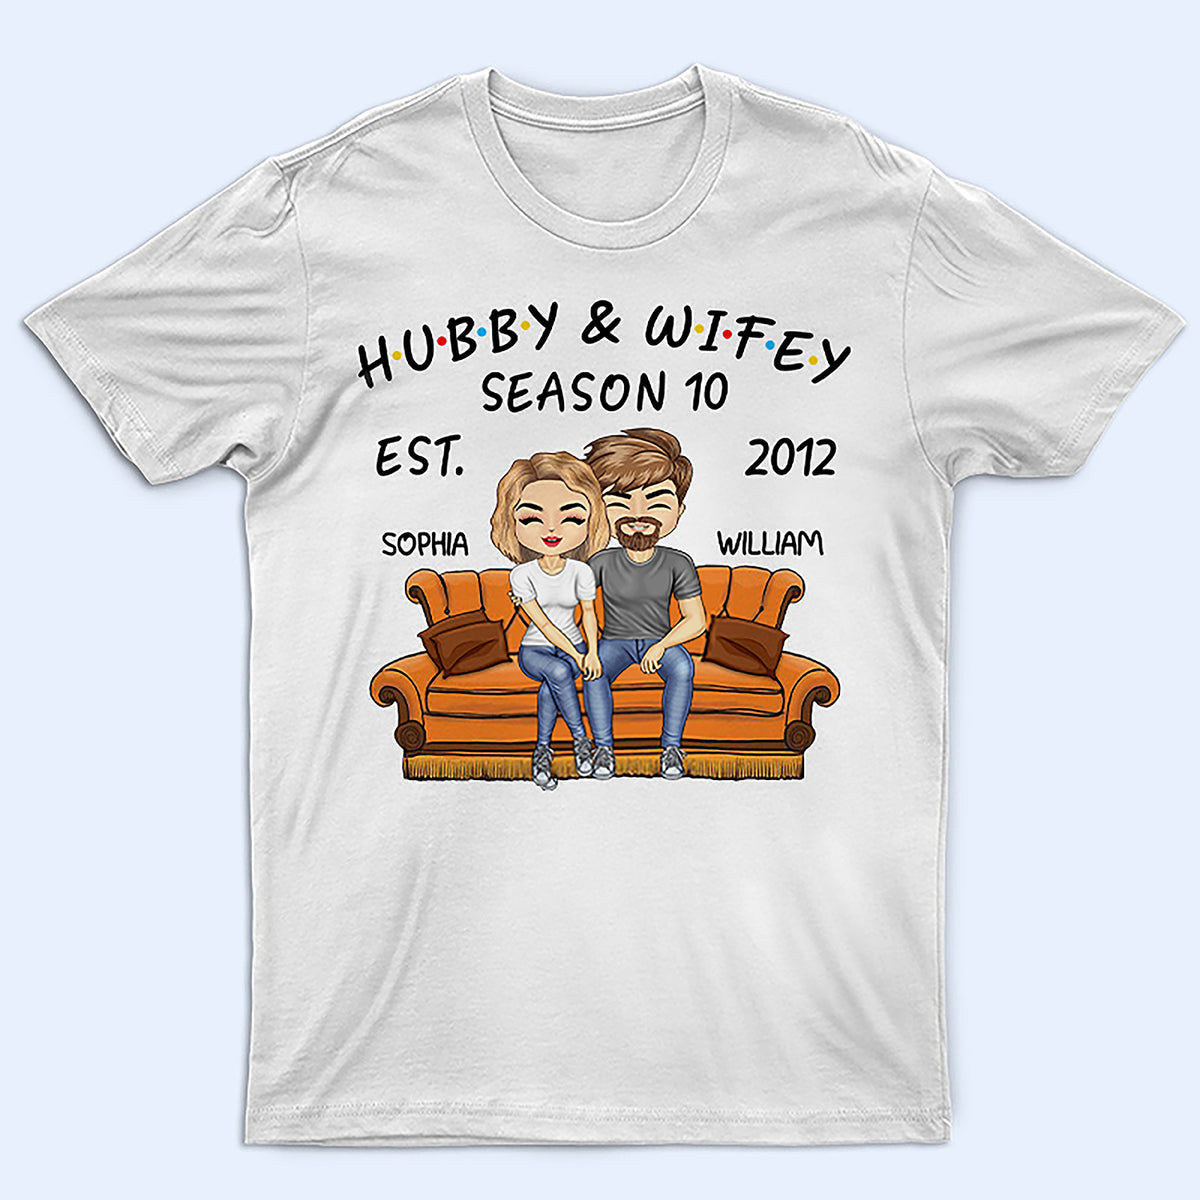 Hubby and Wifey Seasons - Birthday, Anniversary Gift for Spouse, Lover, Husband, Wife, Boyfriend, Girlfriend, Couple - Personalized Custom T Shirt T-S